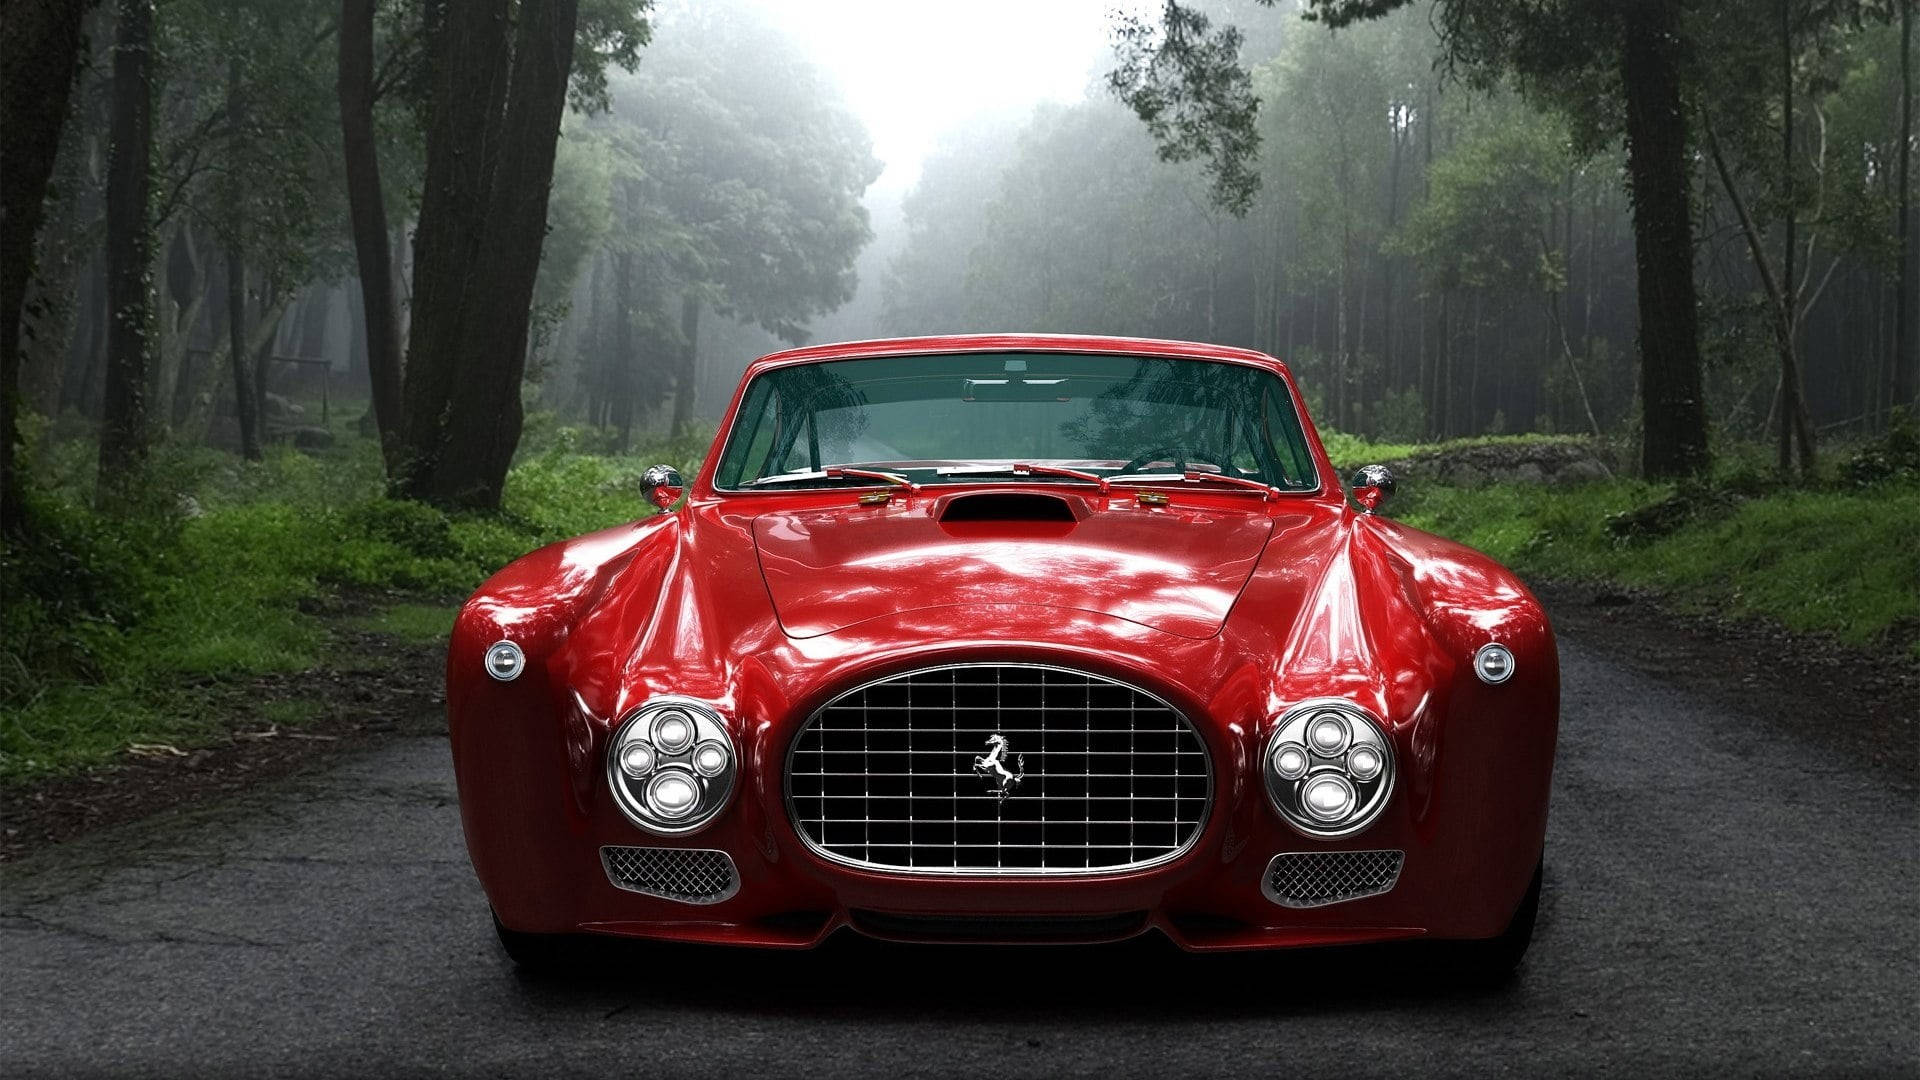 Hd Red Car In Forest Background